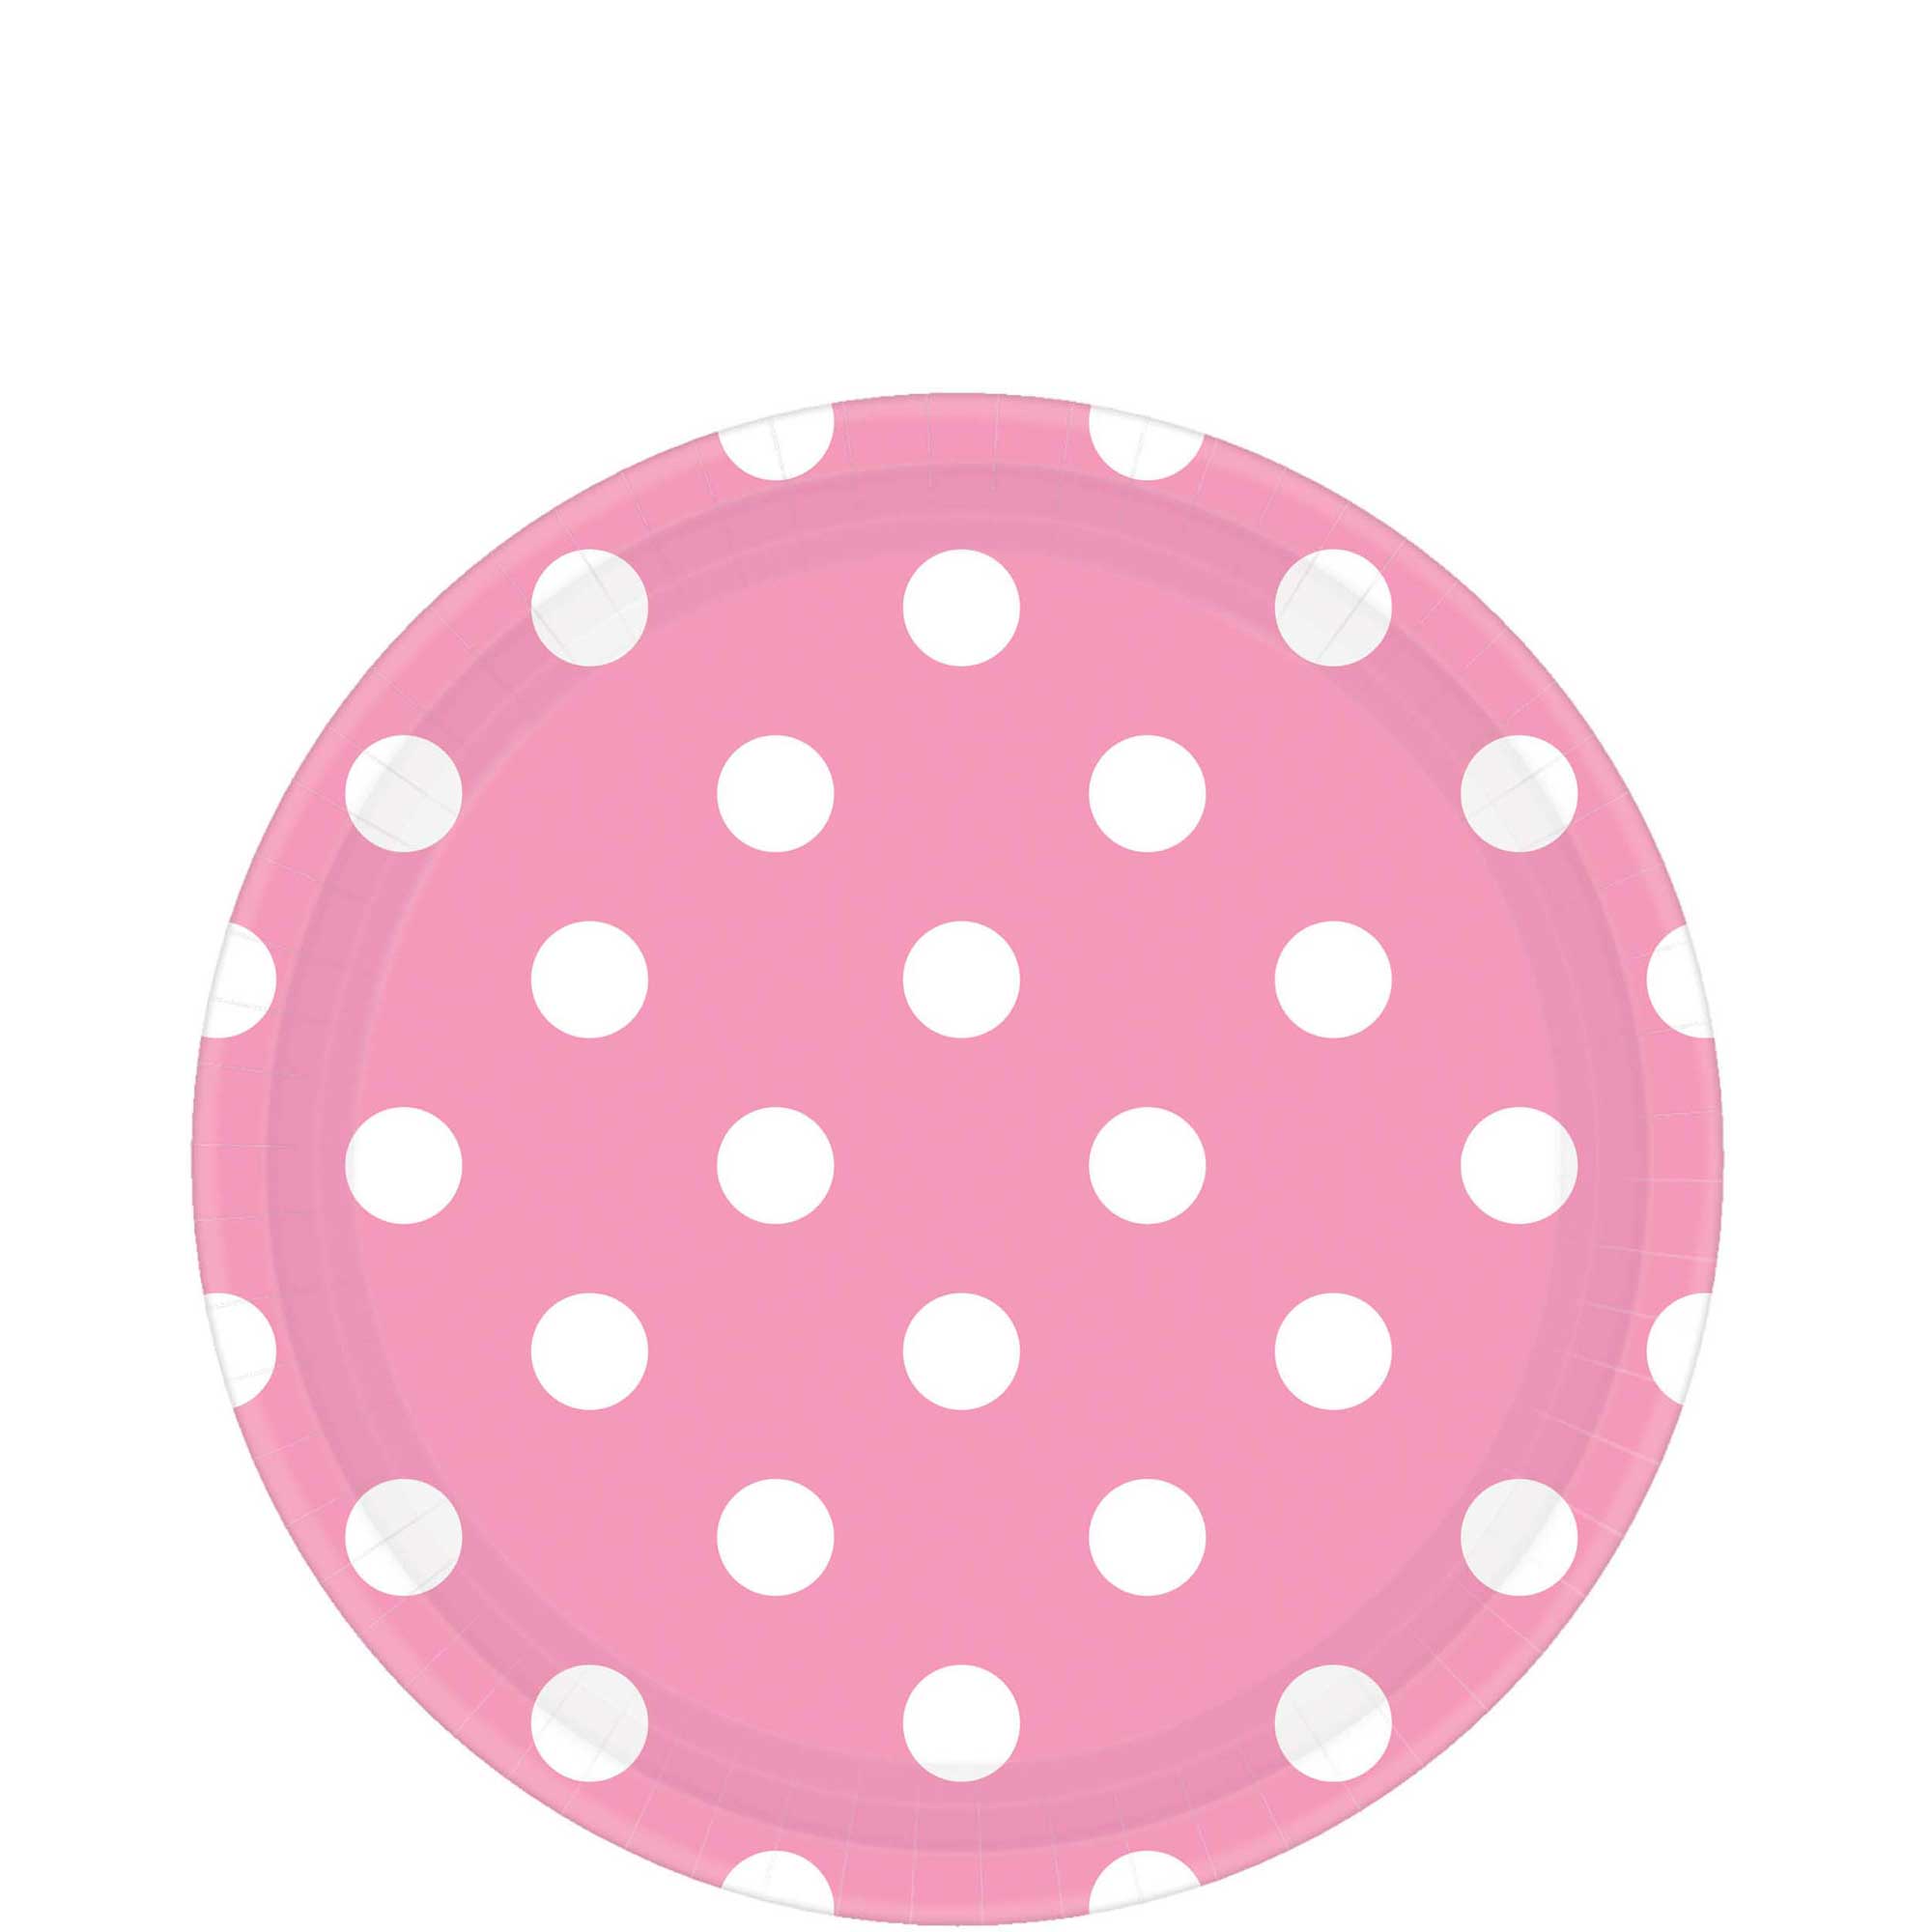 New Pink Dots Round Party Paper Plates 9in 8pcs Printed Tableware - Party Centre